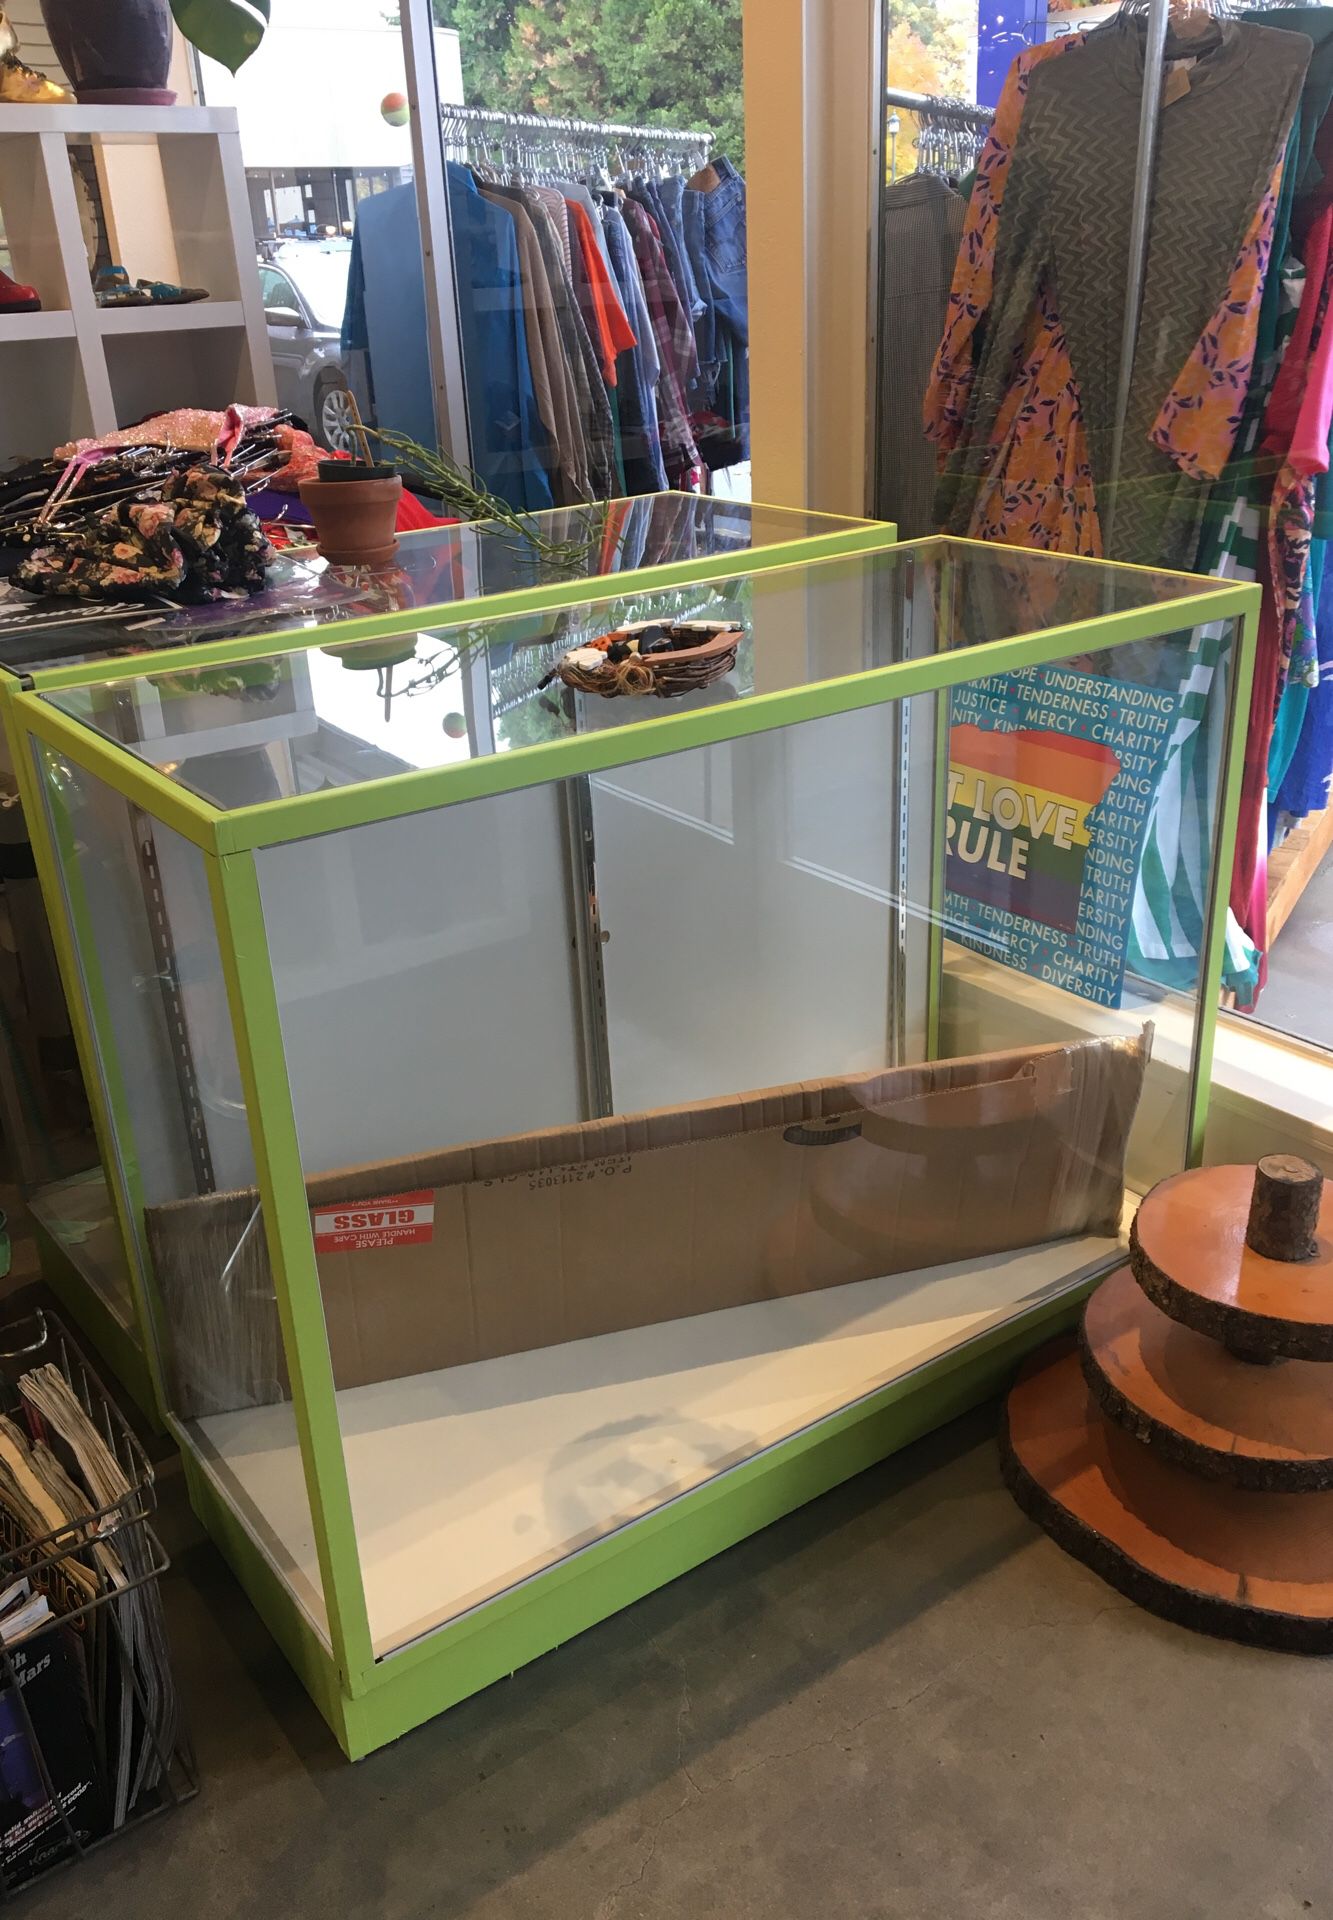 Free display cases!